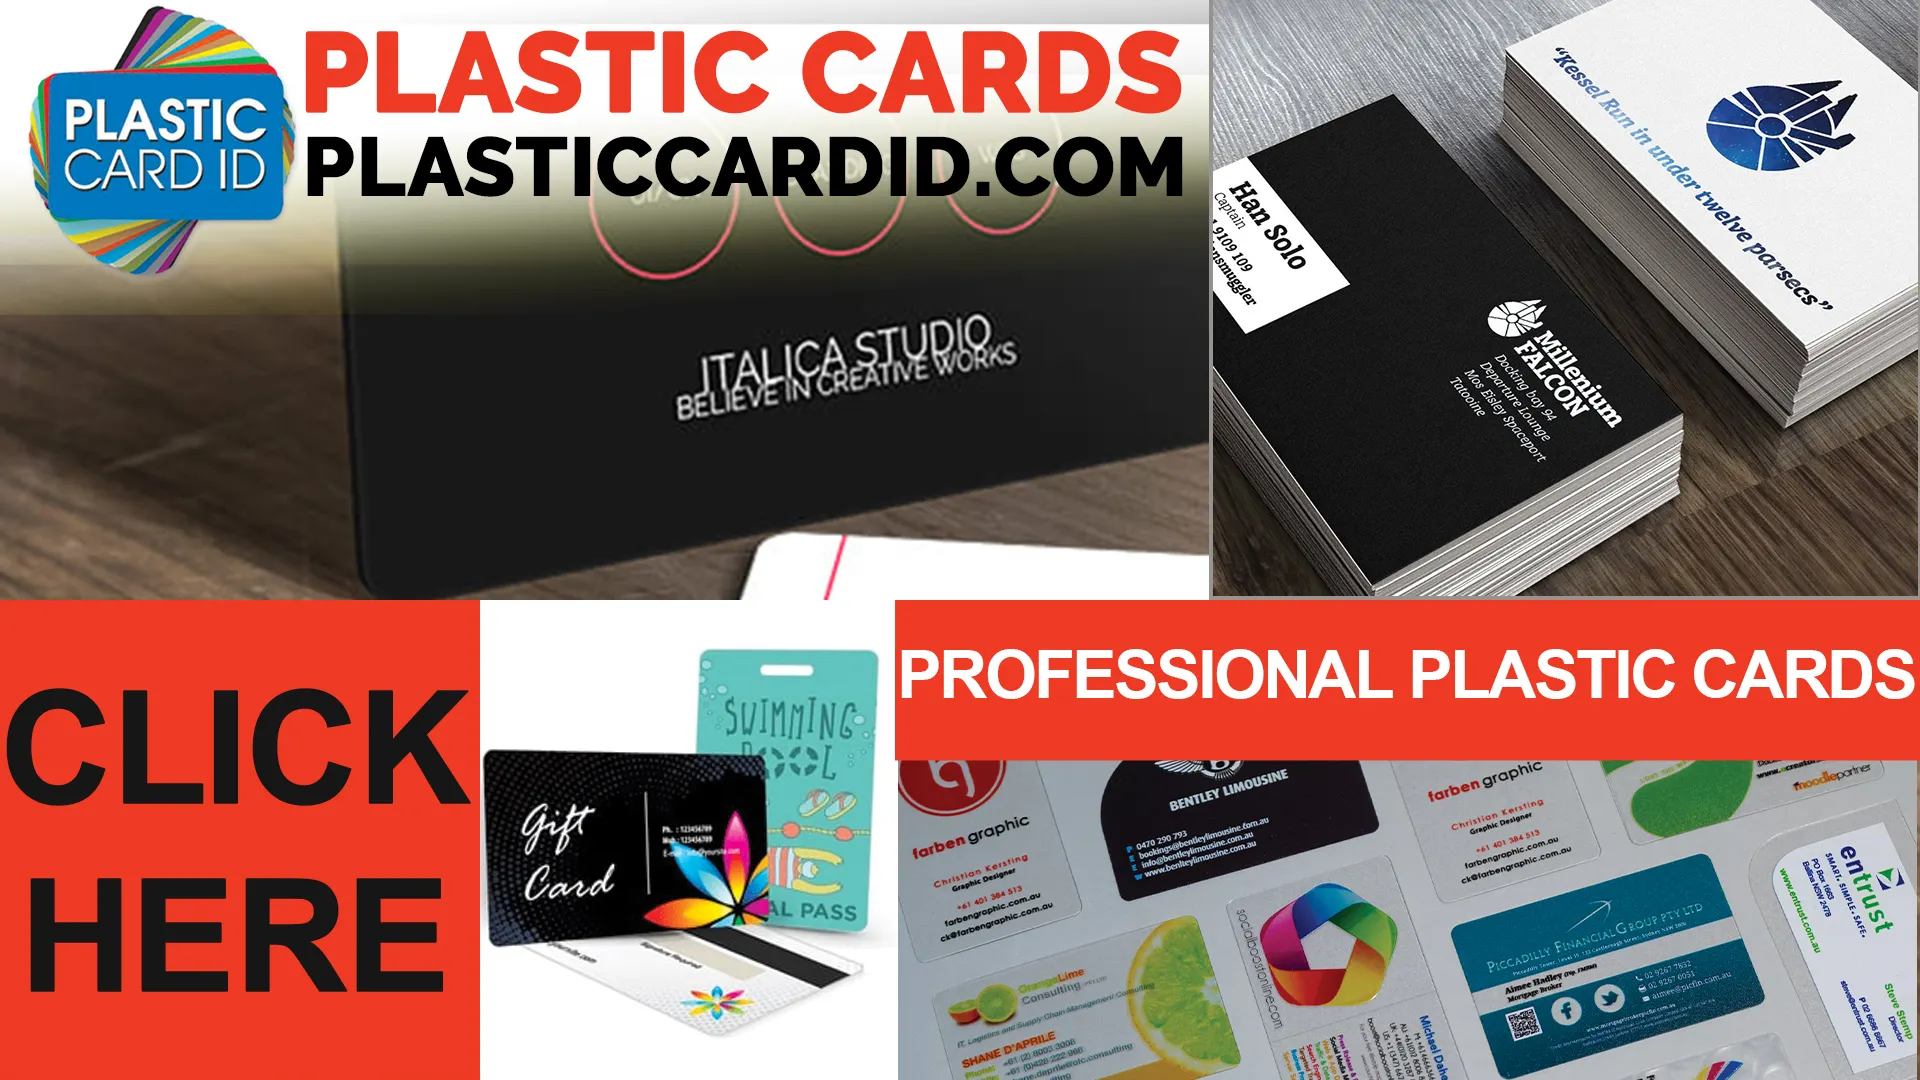 The Extensive List of Plastic Cards at Your Disposal